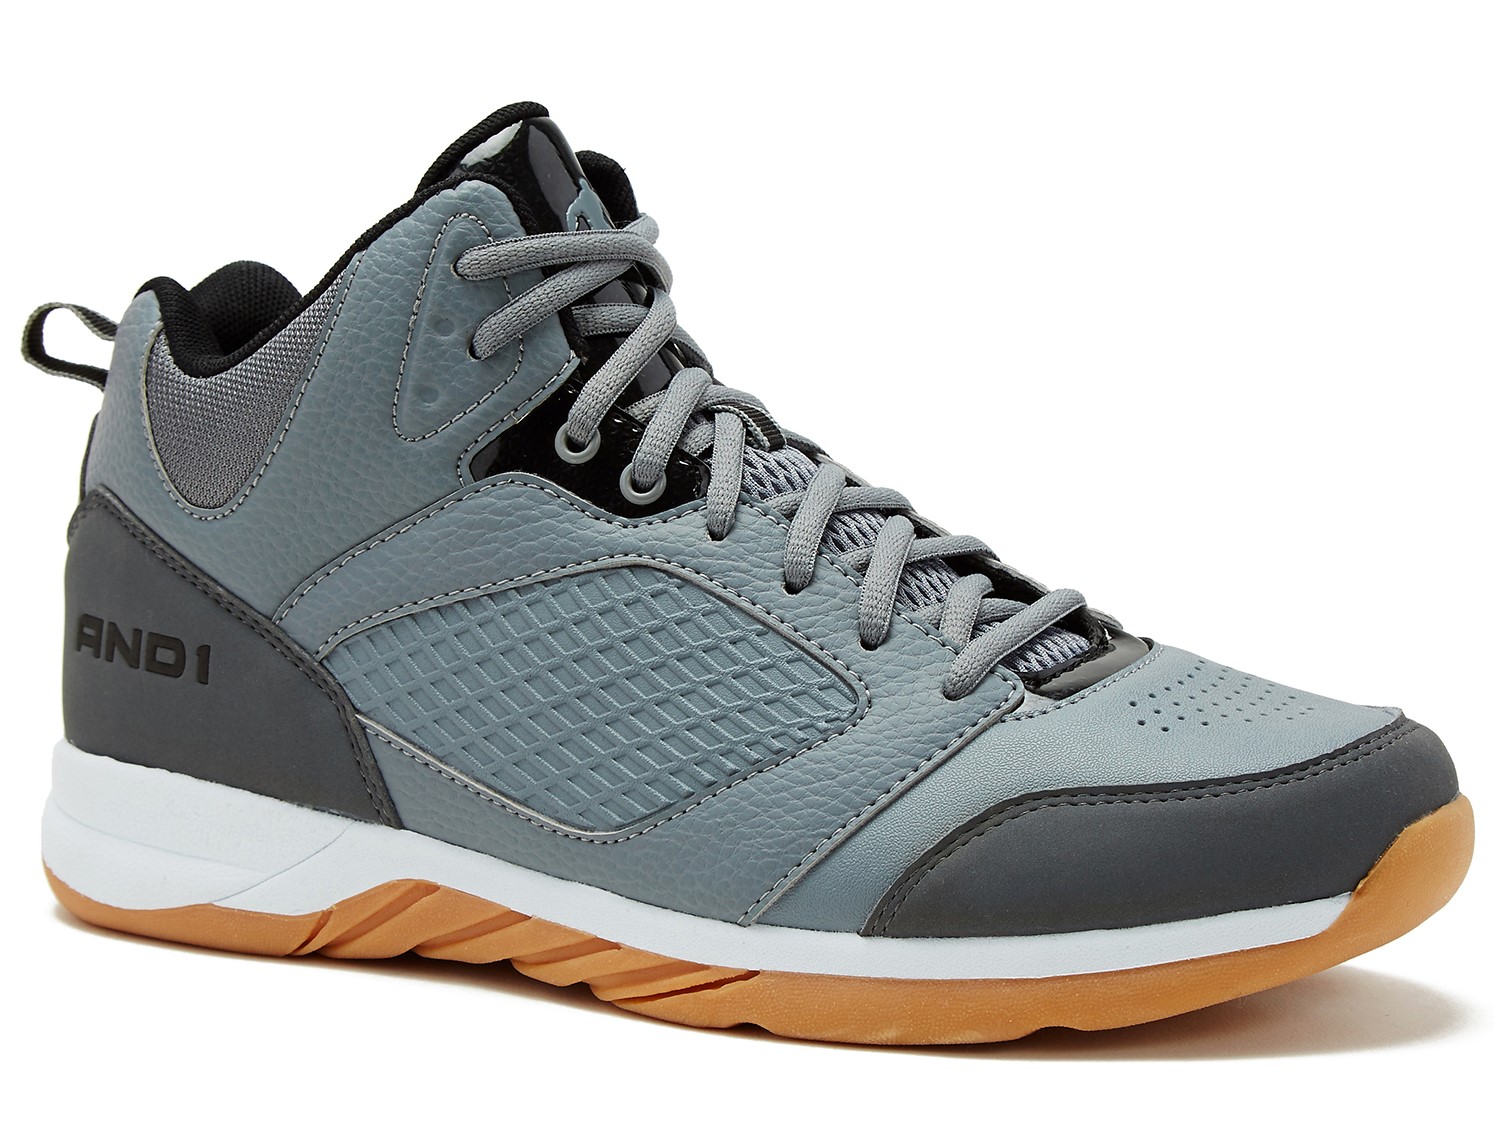 AND1 Men's Capital 2.0 Athletic Shoe - image 1 of 4